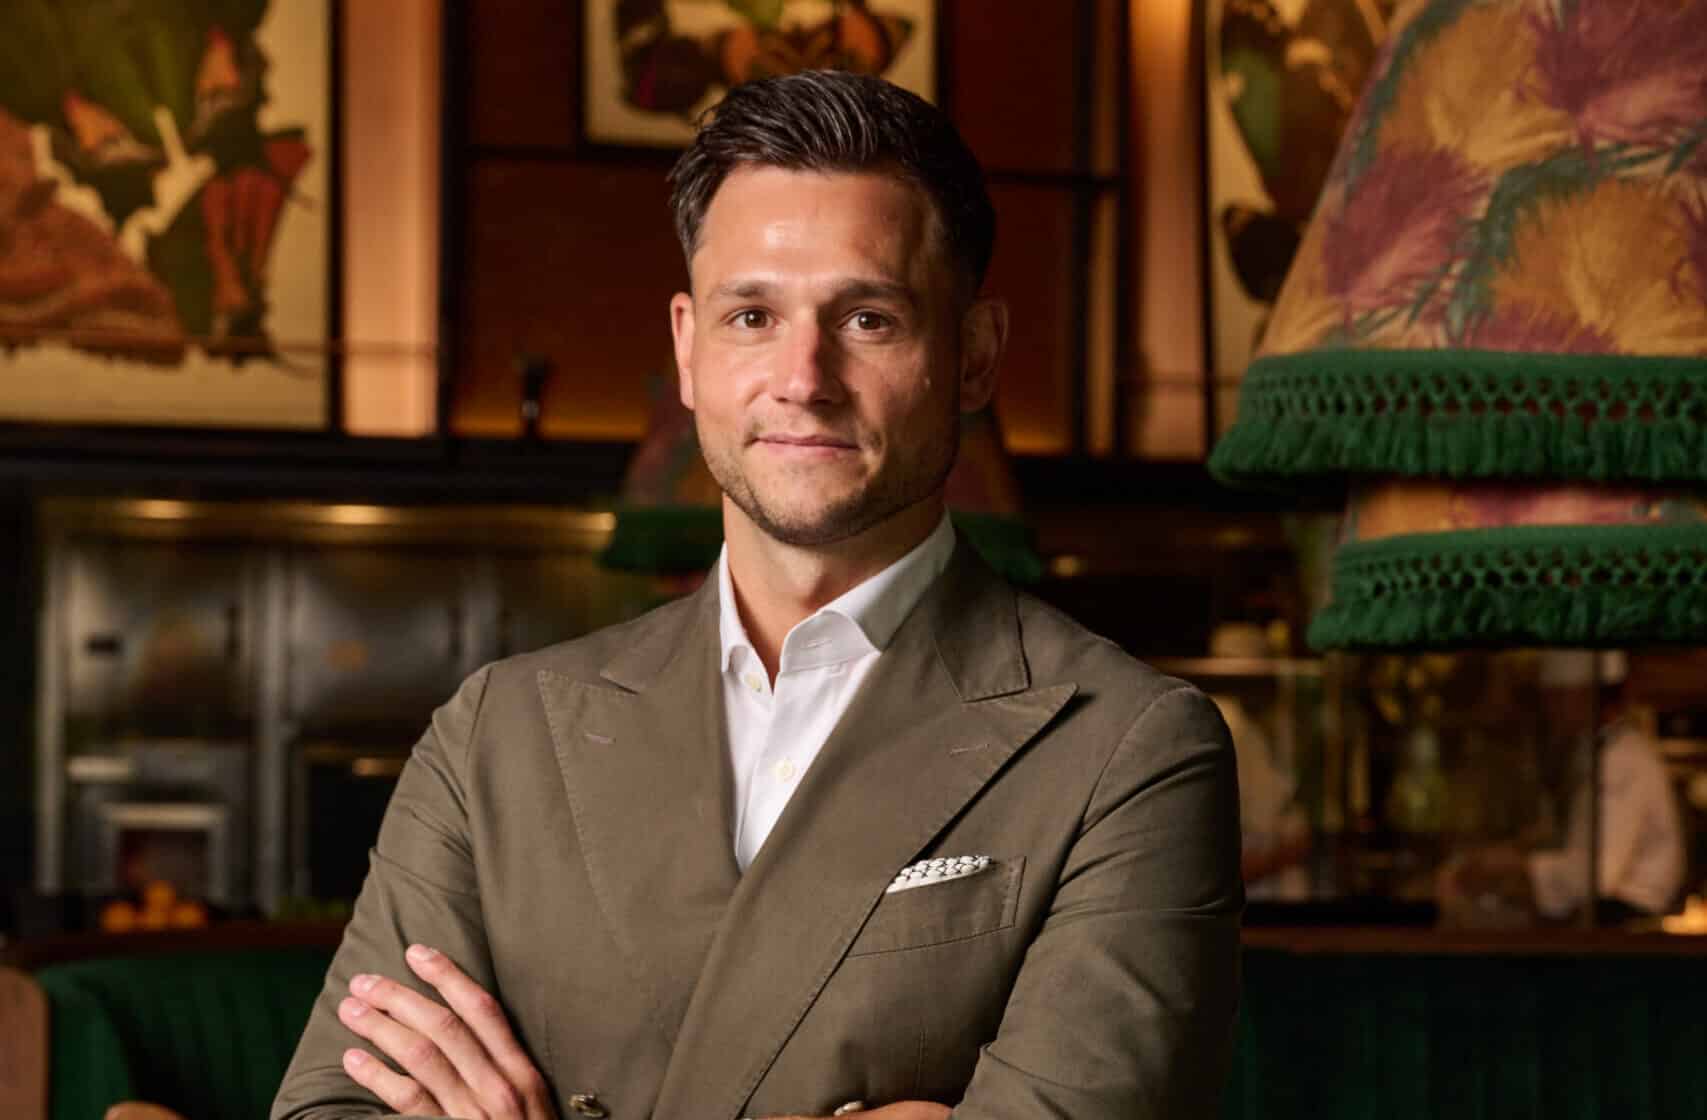 AMAZÓNICO DUBAI ANNOUNCES THE APPOINTMENT OF ANDRE ALEXY AS GENERAL MANAGER